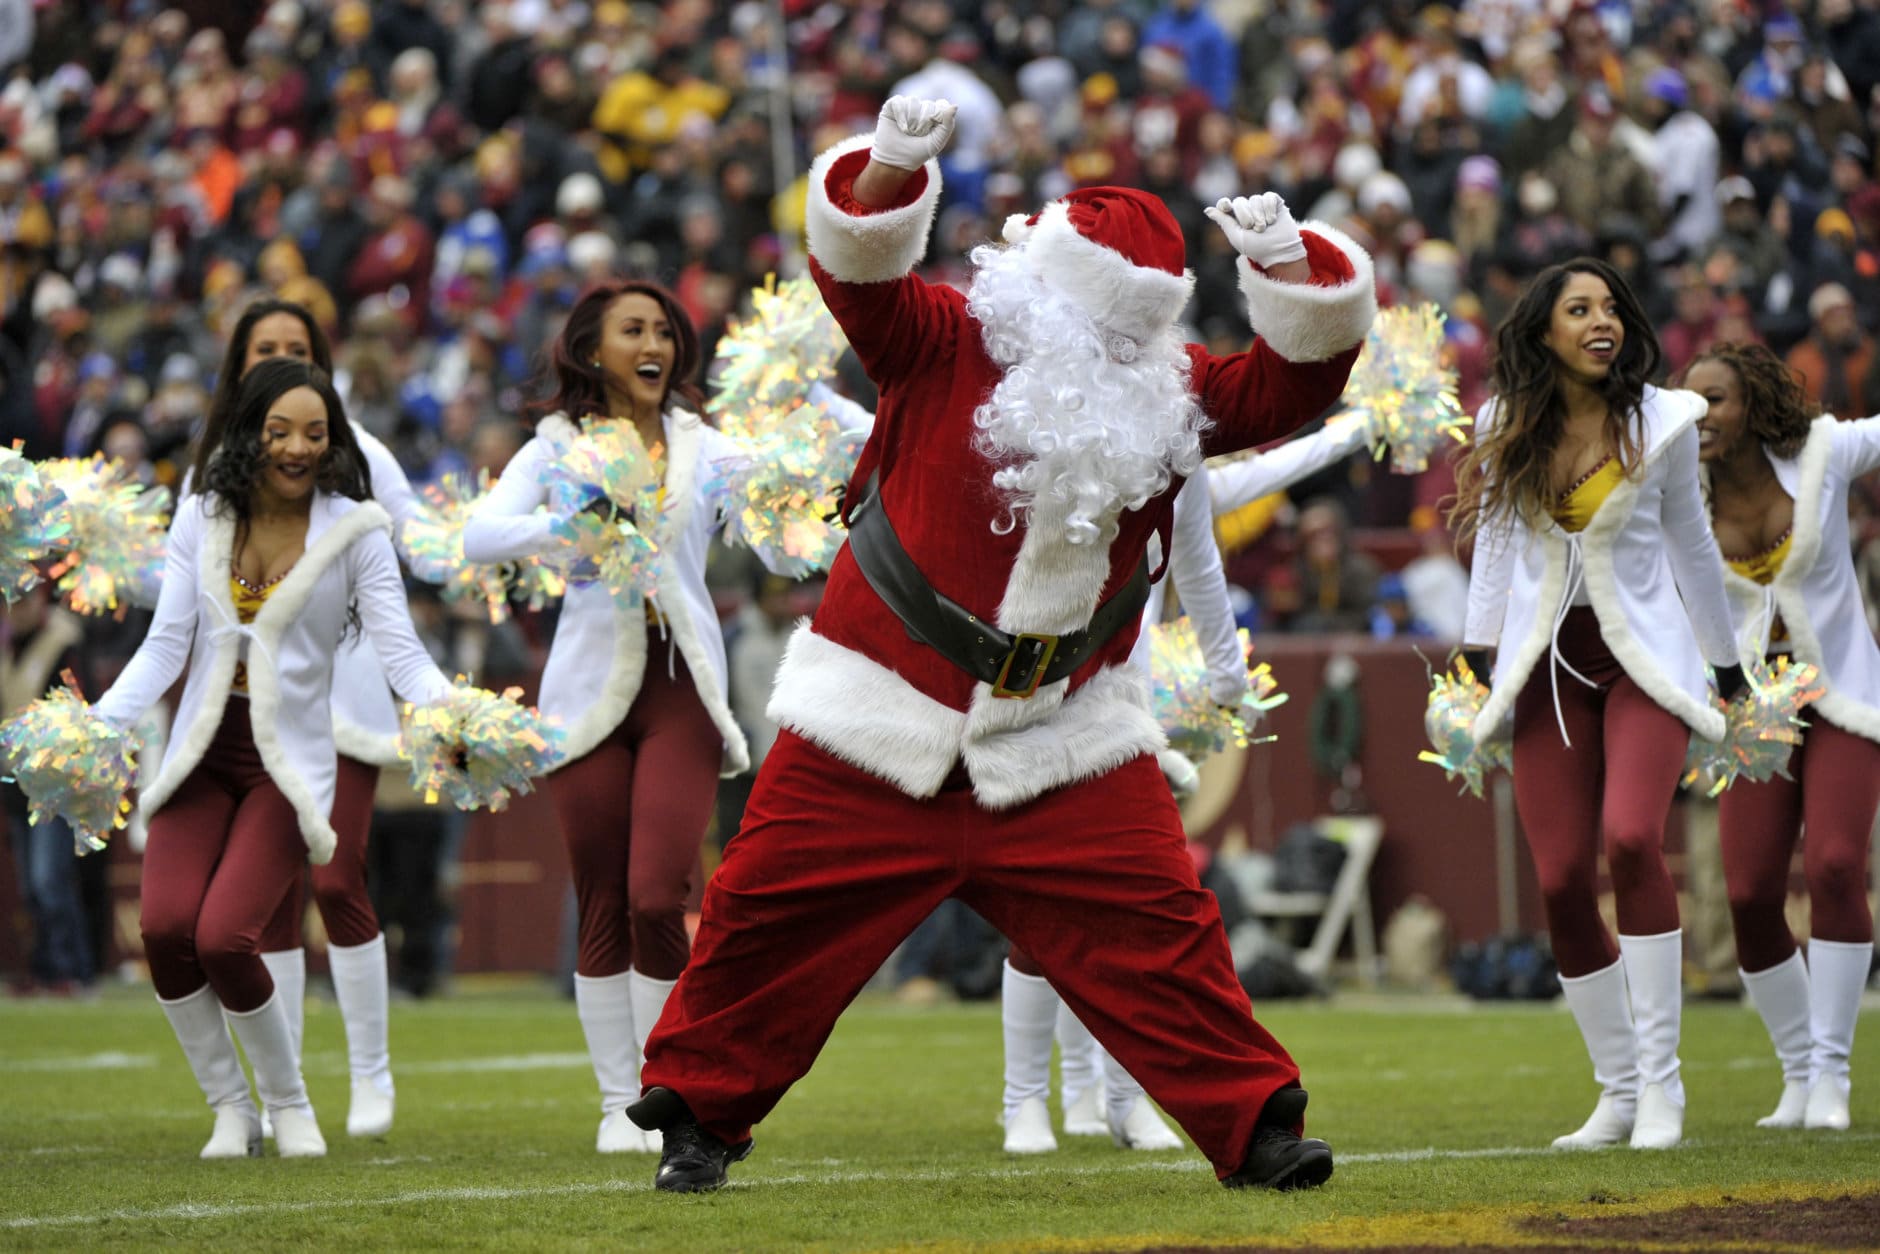 Washington Redskins cheerleaders perform with Santa Claus during an NFL football game between the New York Giants and Washington Redskins, Sunday, Dec. 9, 2018, in Landover, Md. (AP Photo/Mark Tenally)